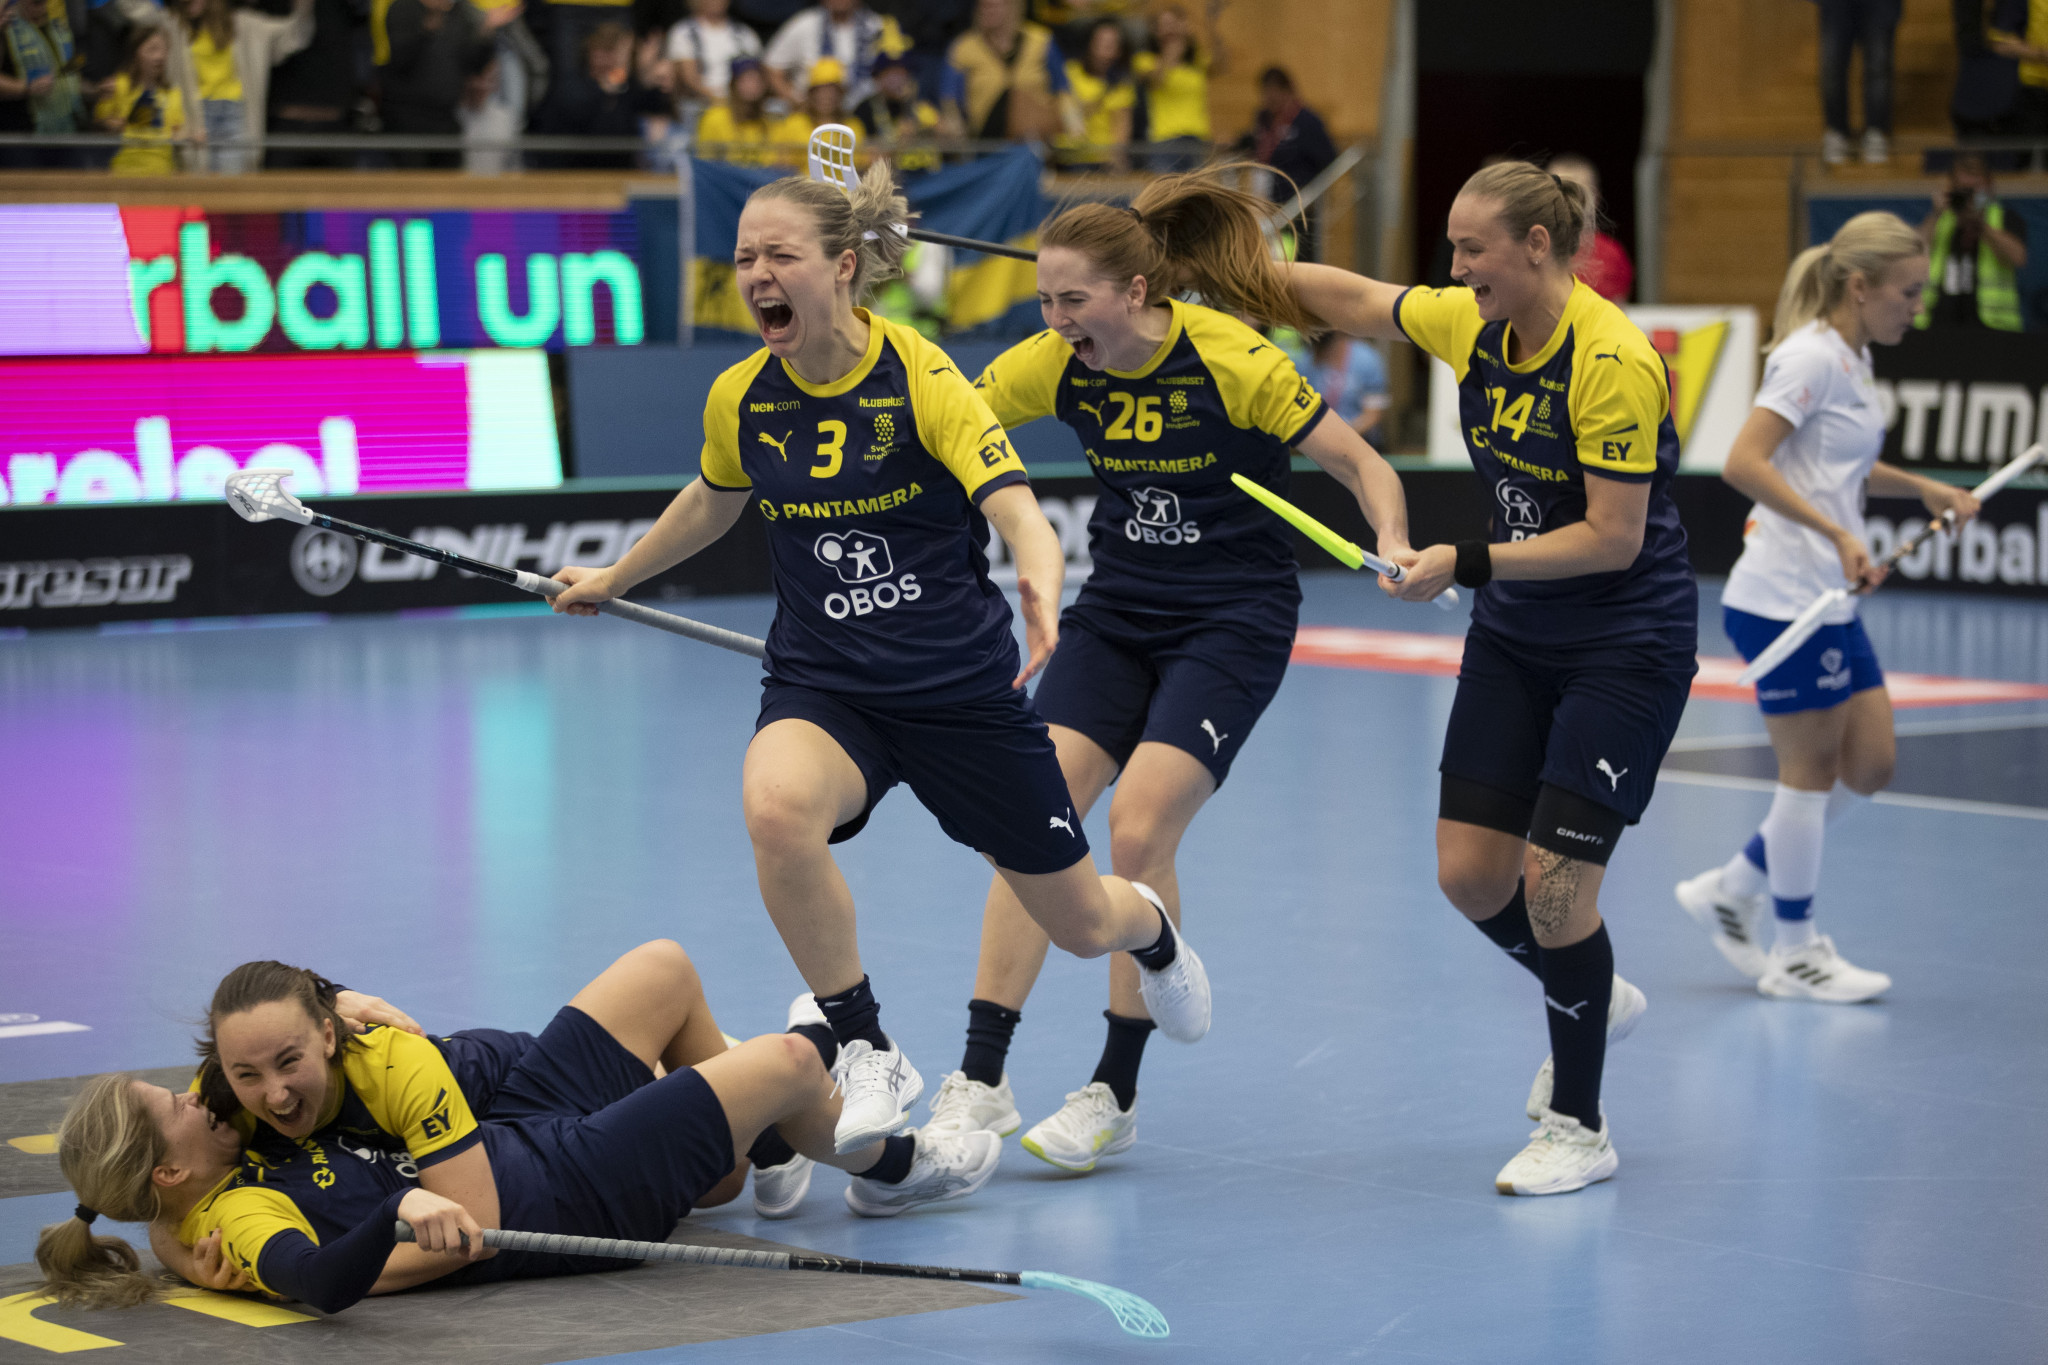 Sweden's players celebrate after Emelie Wibron bagged the match-winning goal ©IFF